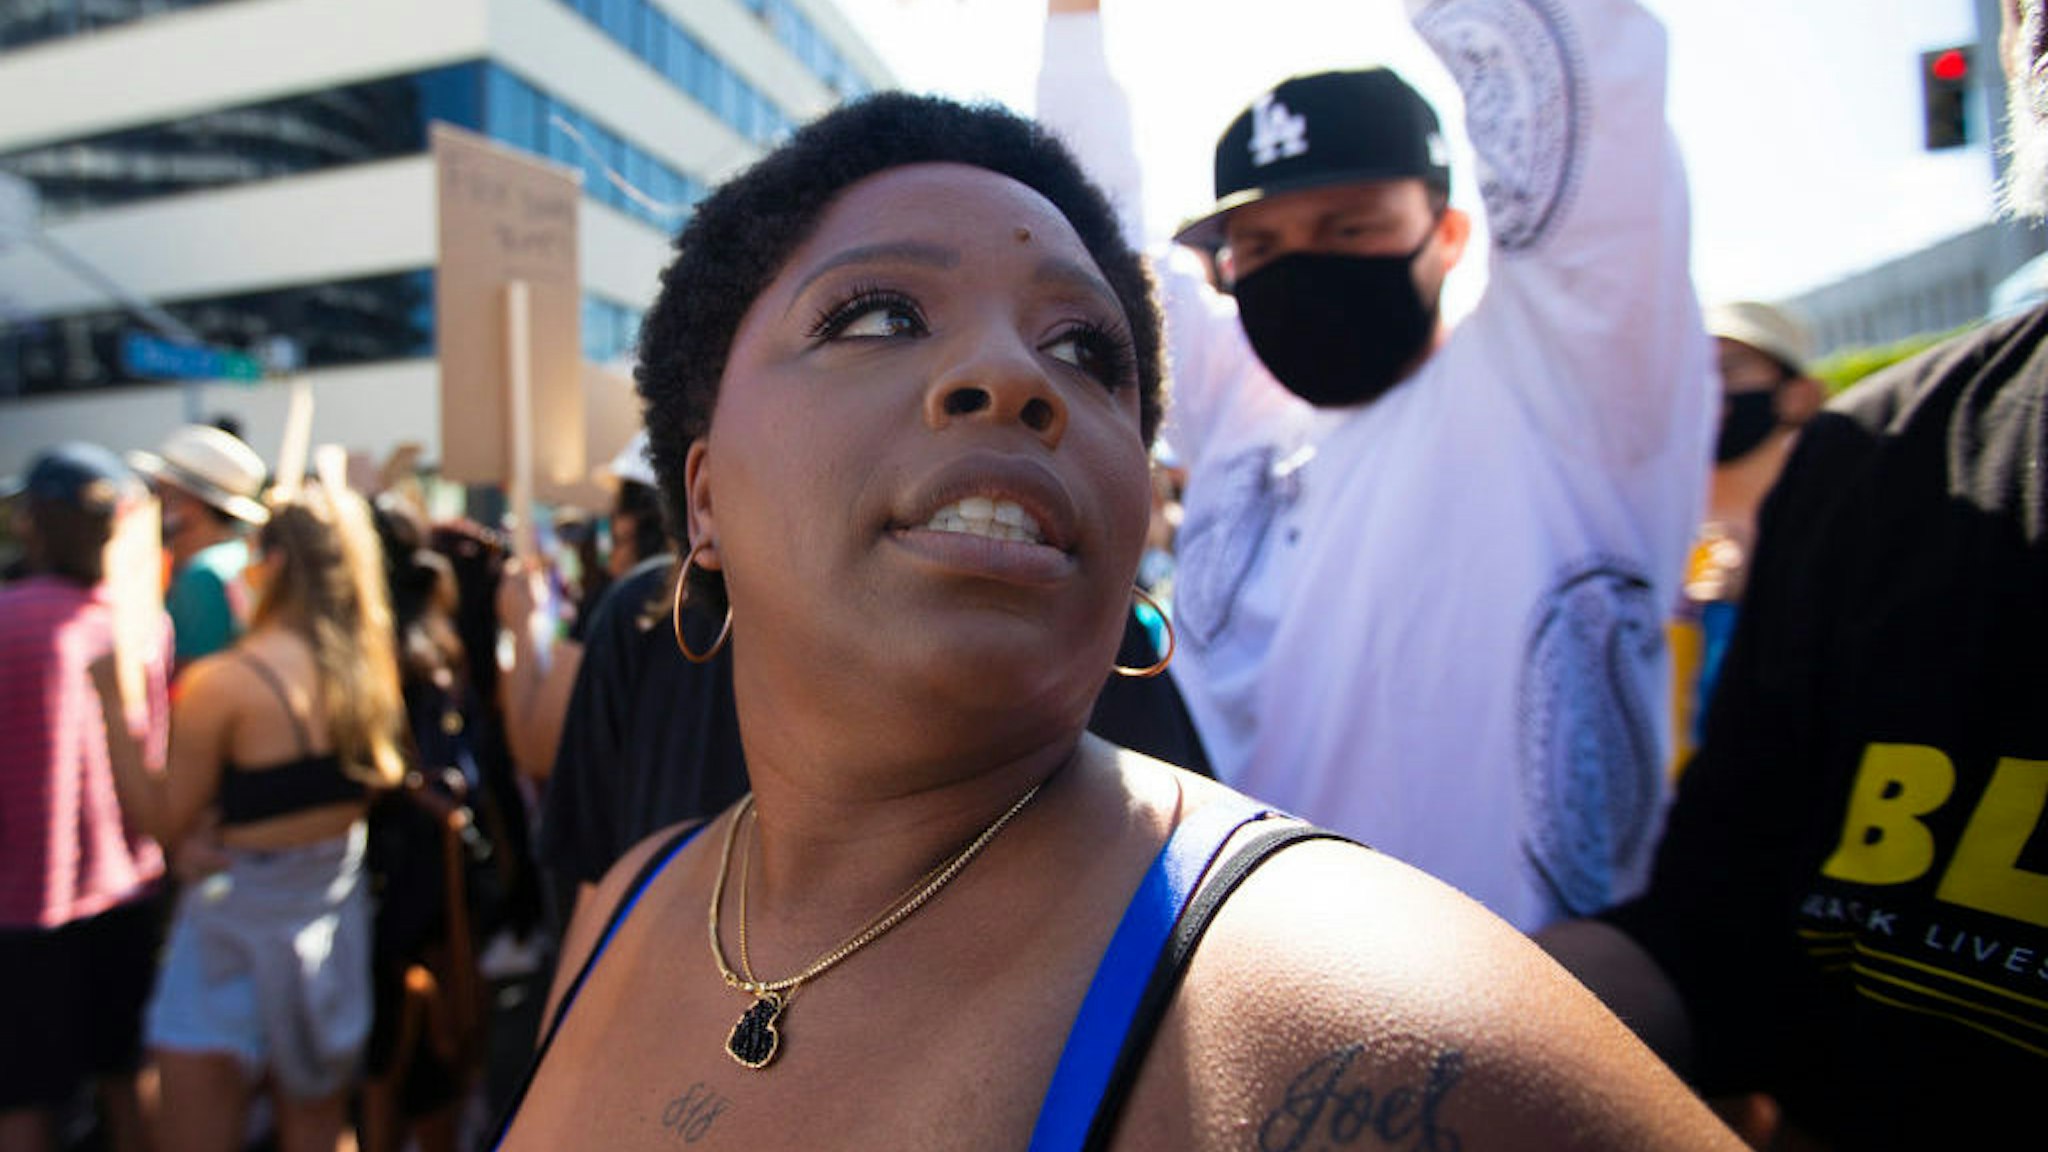 HOLLYWOOD, CA JUNE 7, 2020: Patrisse Cullors is one of the three co-founders of the Black Lives Matter movement. She participated in the peaceful march in Hollywood, CA today Sunday June 7, 2020. Thousands of people participated in today’s peaceful protest against police sparked by the death of George Floyd. (Francine Orr/ Los Angeles Times)